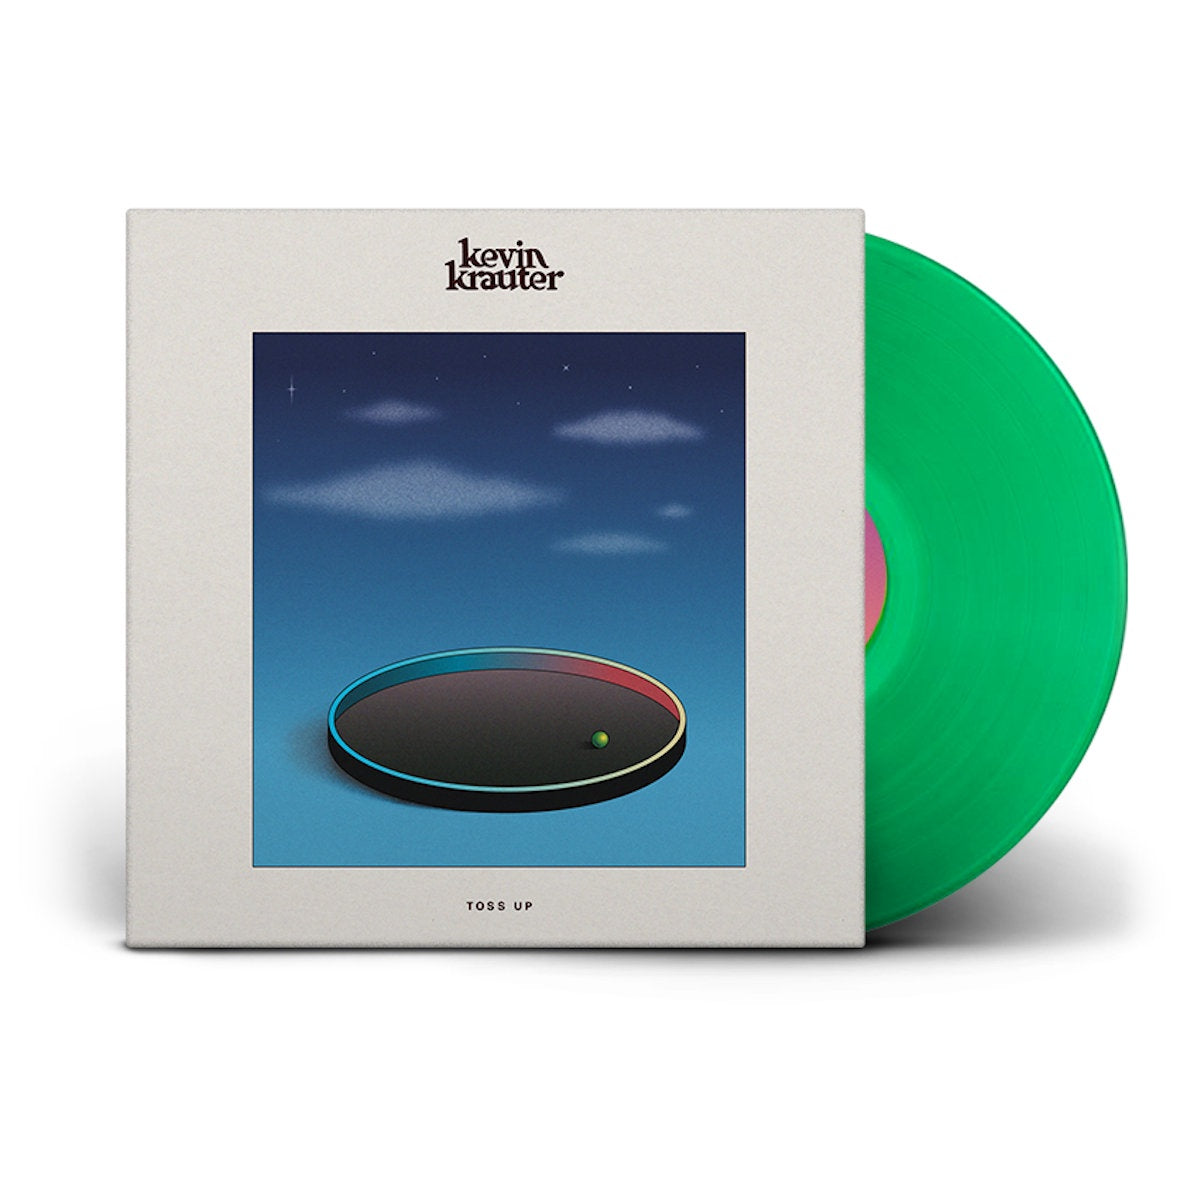 Kevin Krauter ‎– Toss Up - New Vinyl Lp 2018 Bayonet Limited Edition Pressing on Green Vinyl with Download - Indie Pop